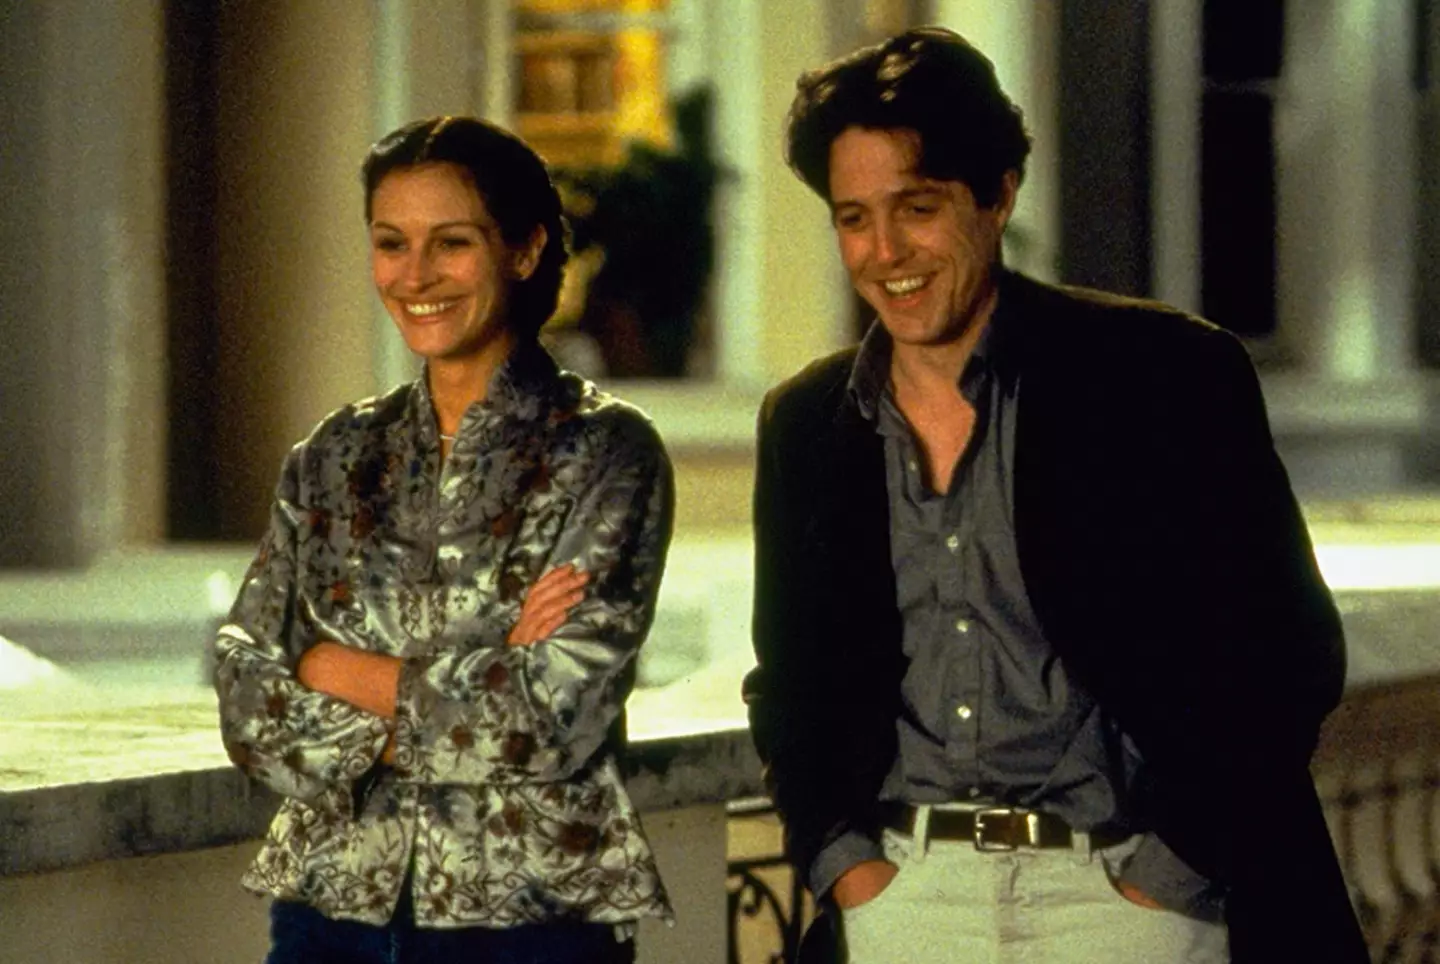 Grant starred with Julia Roberts in Notting Hill.